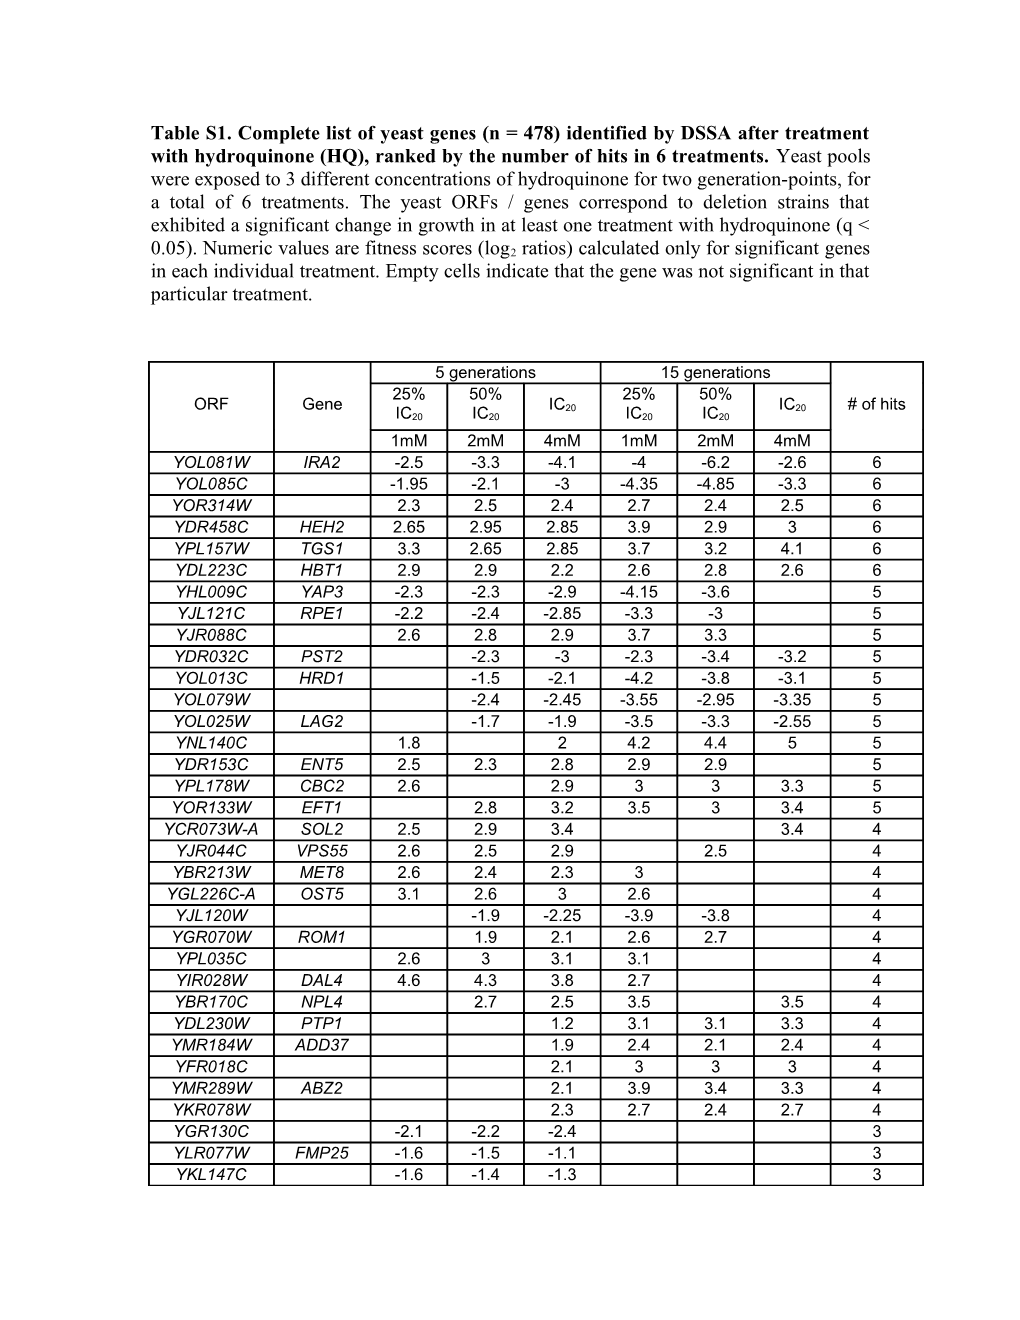 Table S1. Complete List of Yeast Genes (N = 478) Identified by DSSA After Treatment With